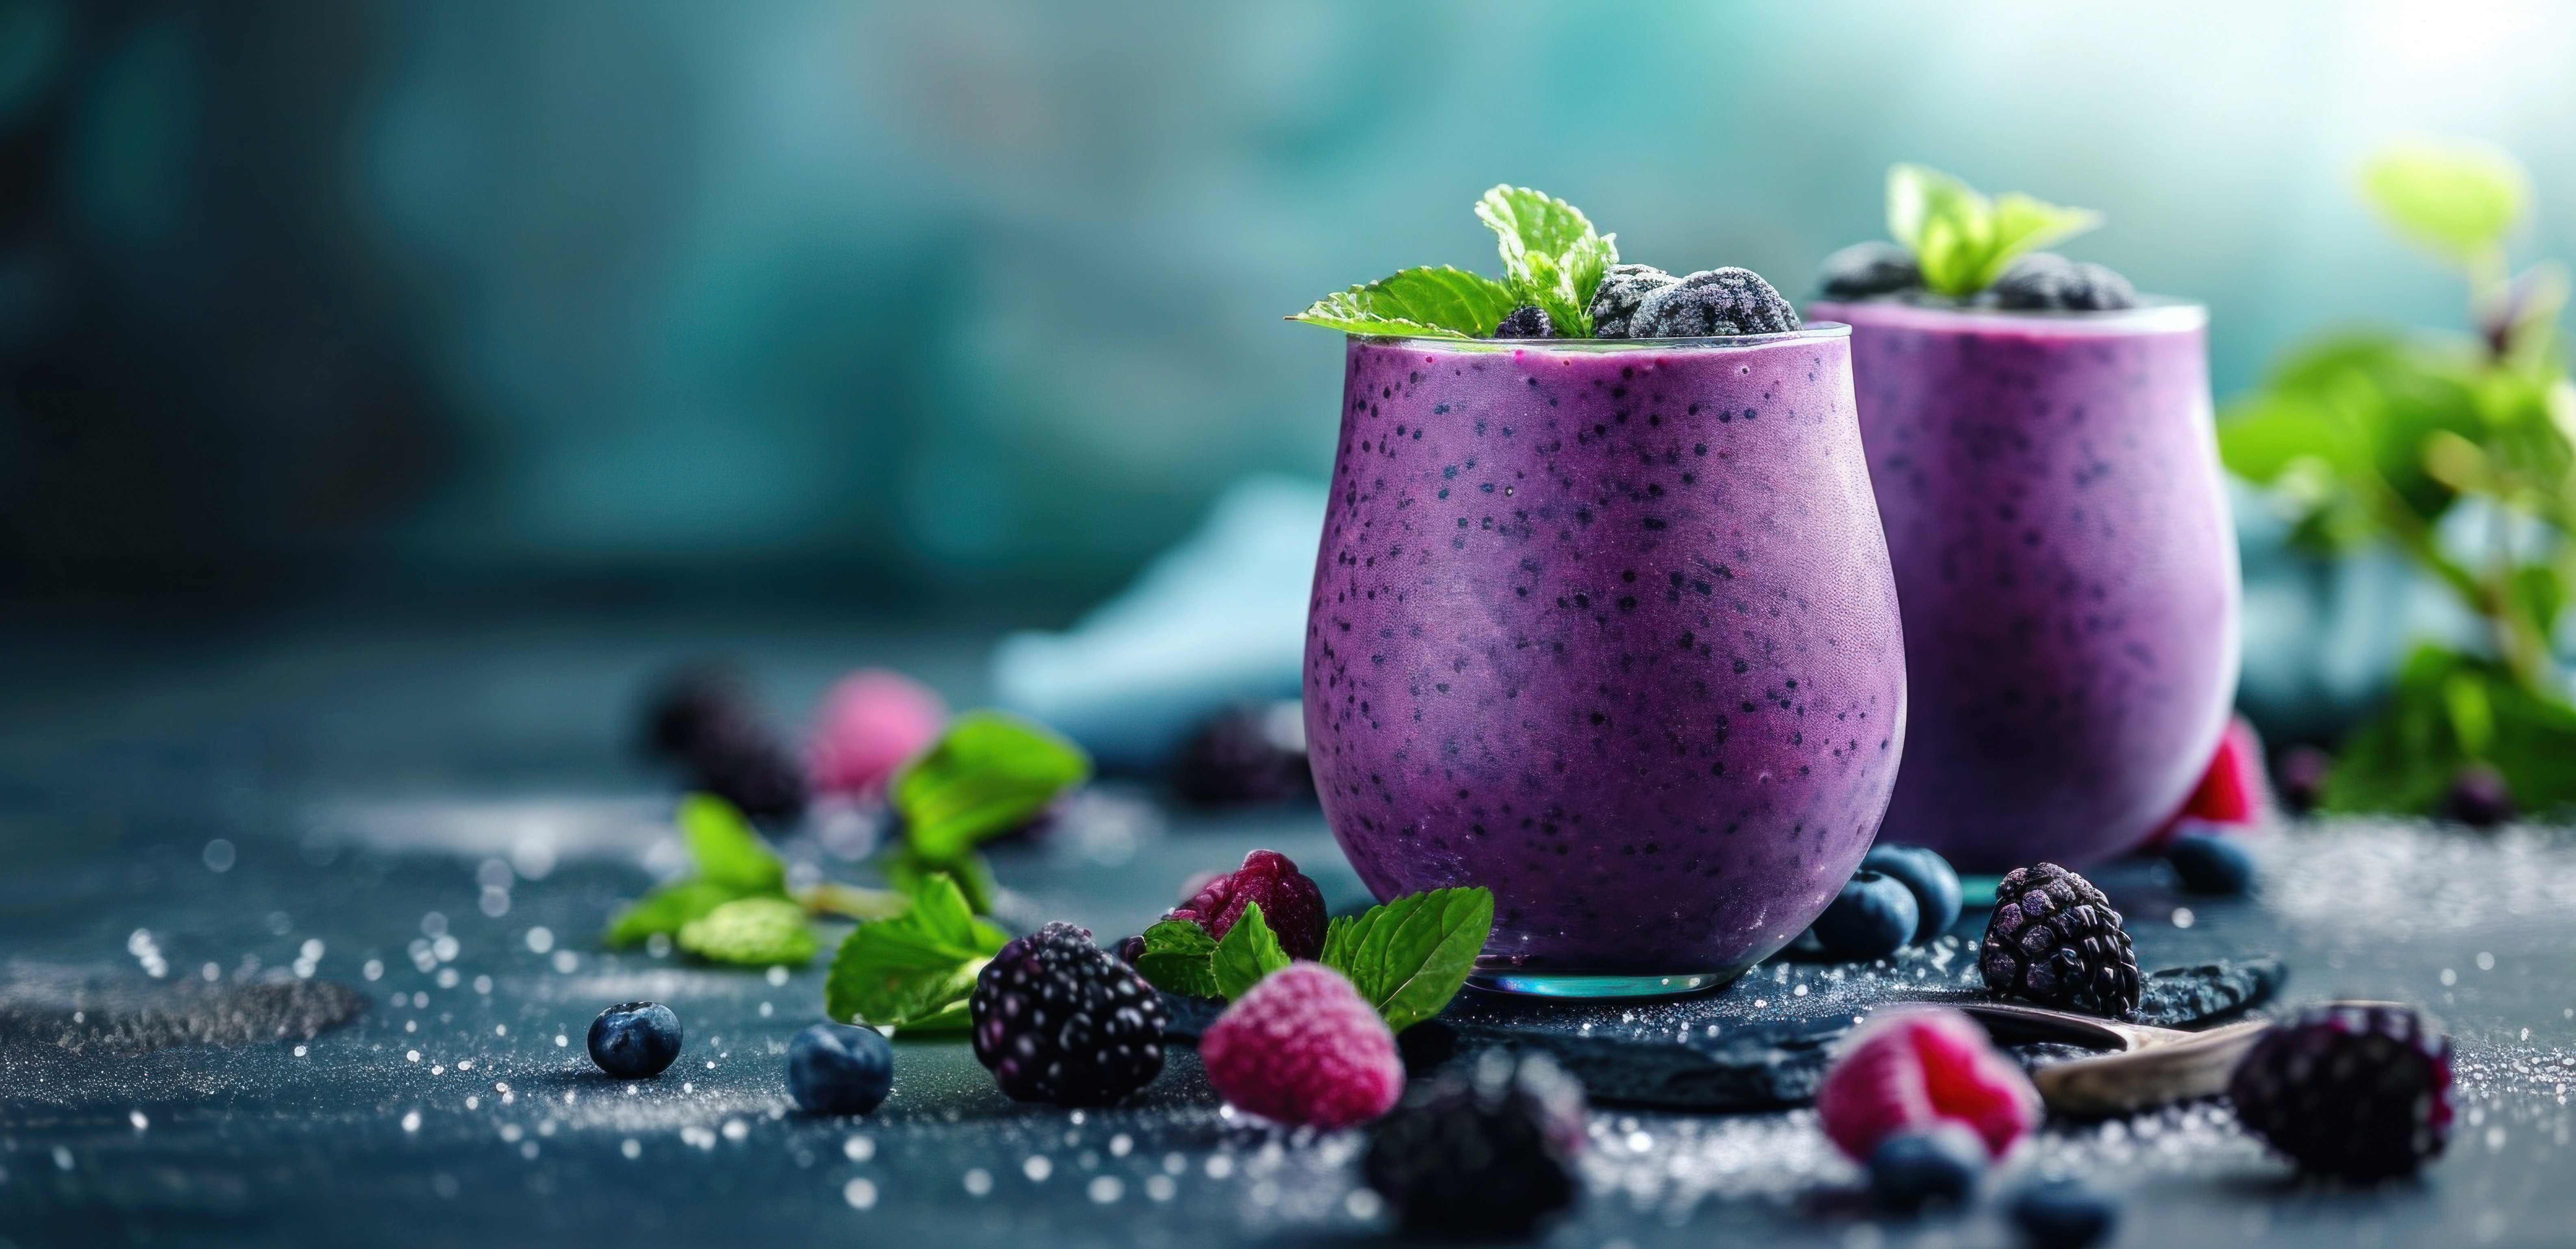 Add a little zing into your morning with a blackberry smoothie. Check out these deliciously healthy smoothie recipes!